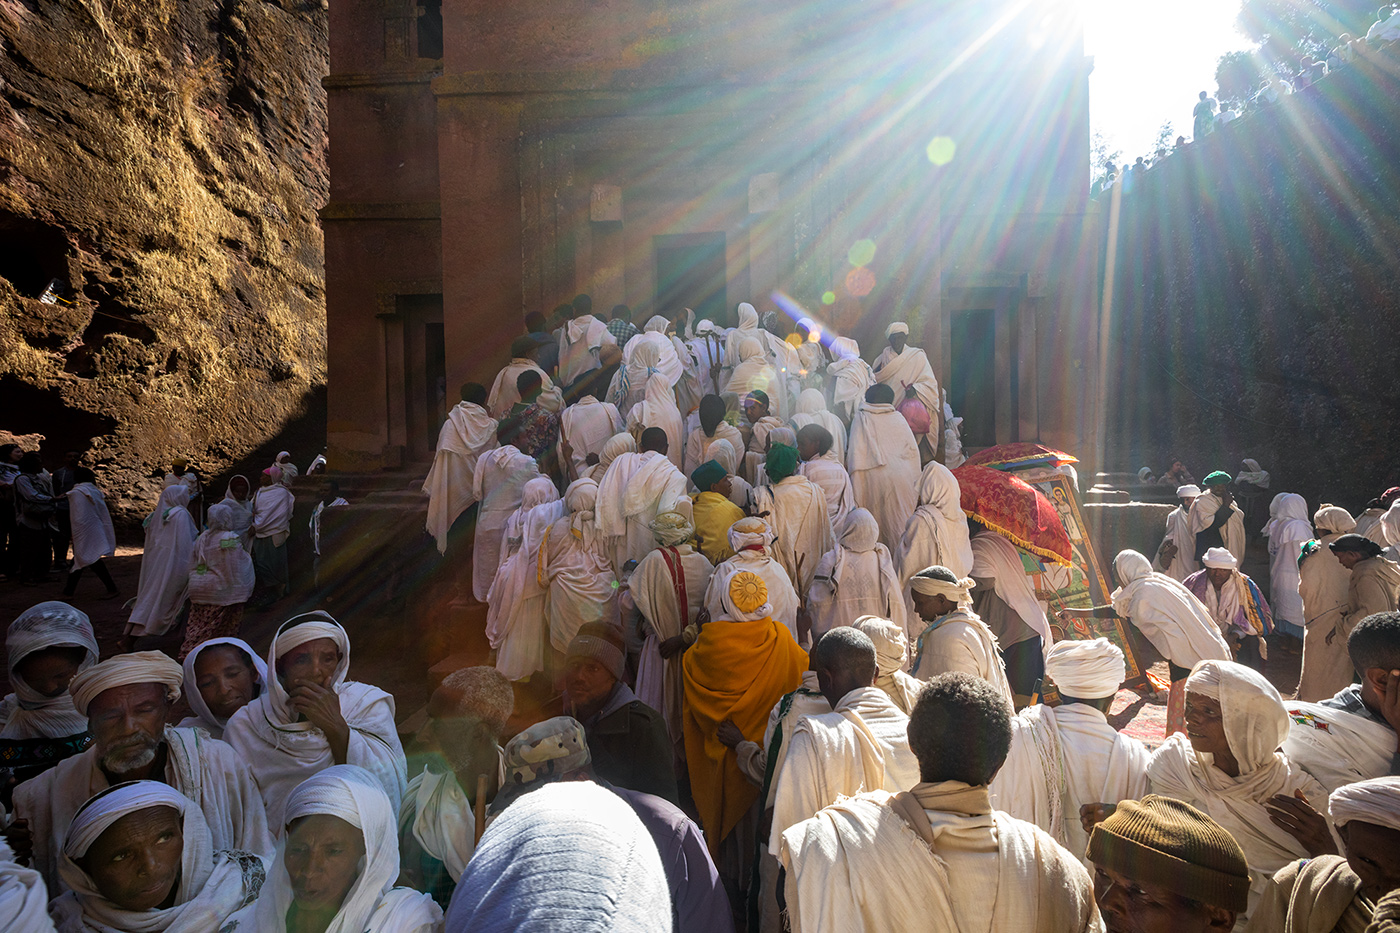 Pilgrims are visiting the Church of Saint George during the “Genna (Ethiopian Christmas)” festival in Lalibela,